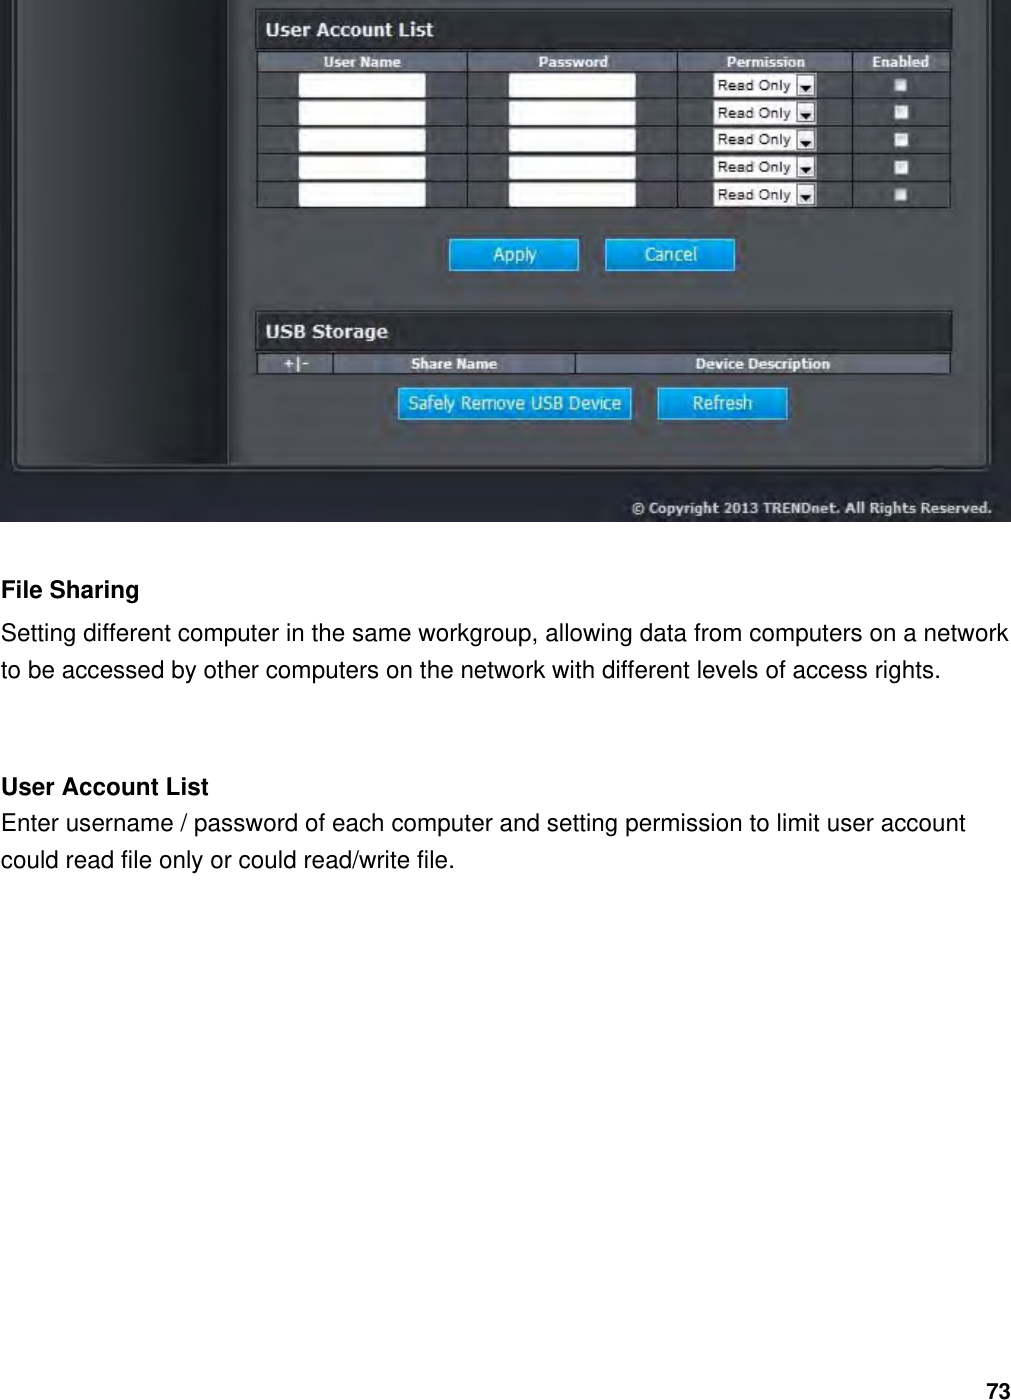 73  File Sharing Setting different computer in the same workgroup, allowing data from computers on a network to be accessed by other computers on the network with different levels of access rights.  User Account List Enter username / password of each computer and setting permission to limit user account could read file only or could read/write file.     